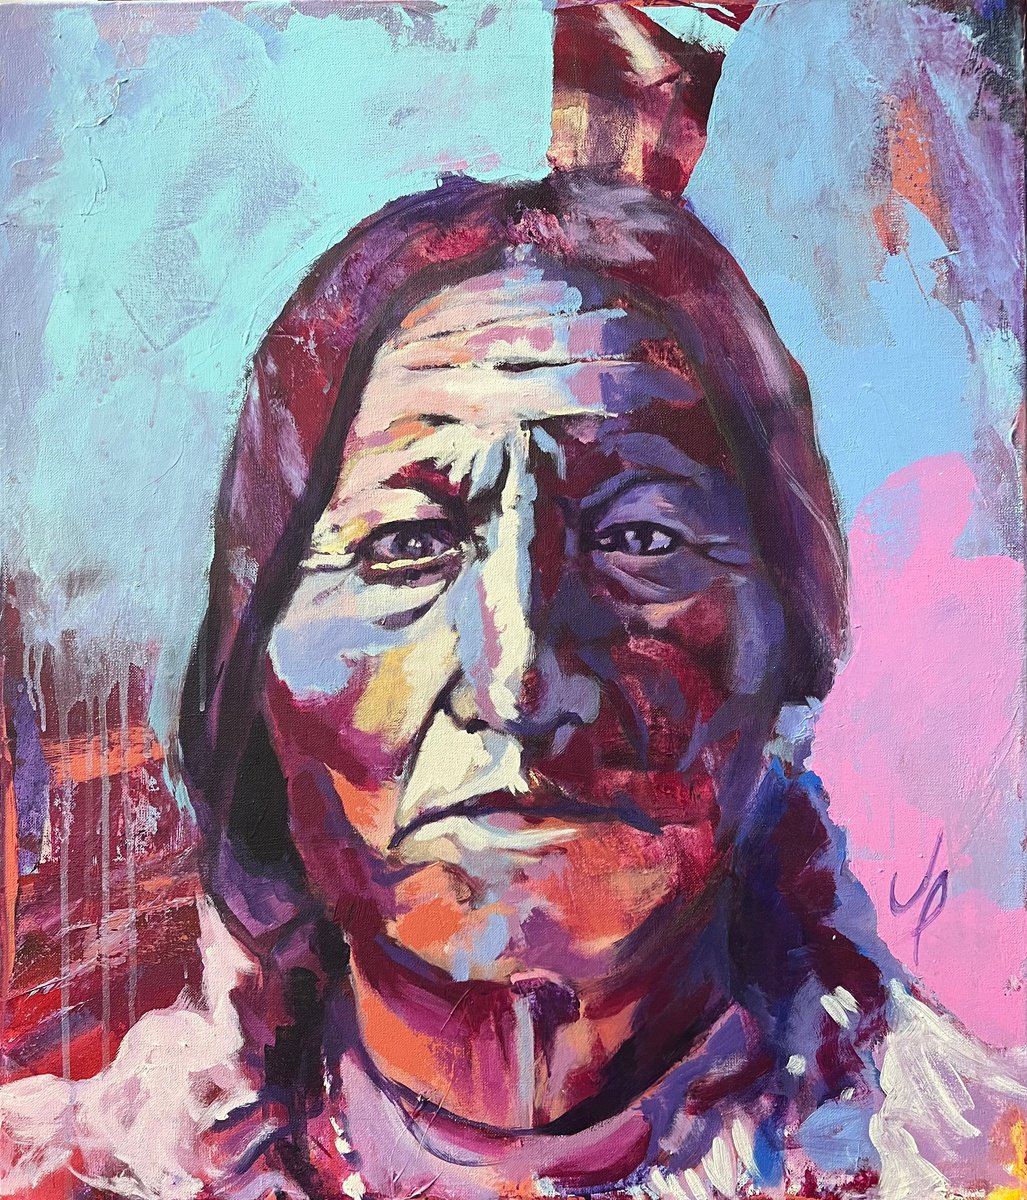 Native American Portrait 70x60cm acrylic on canvas by Javier Pea